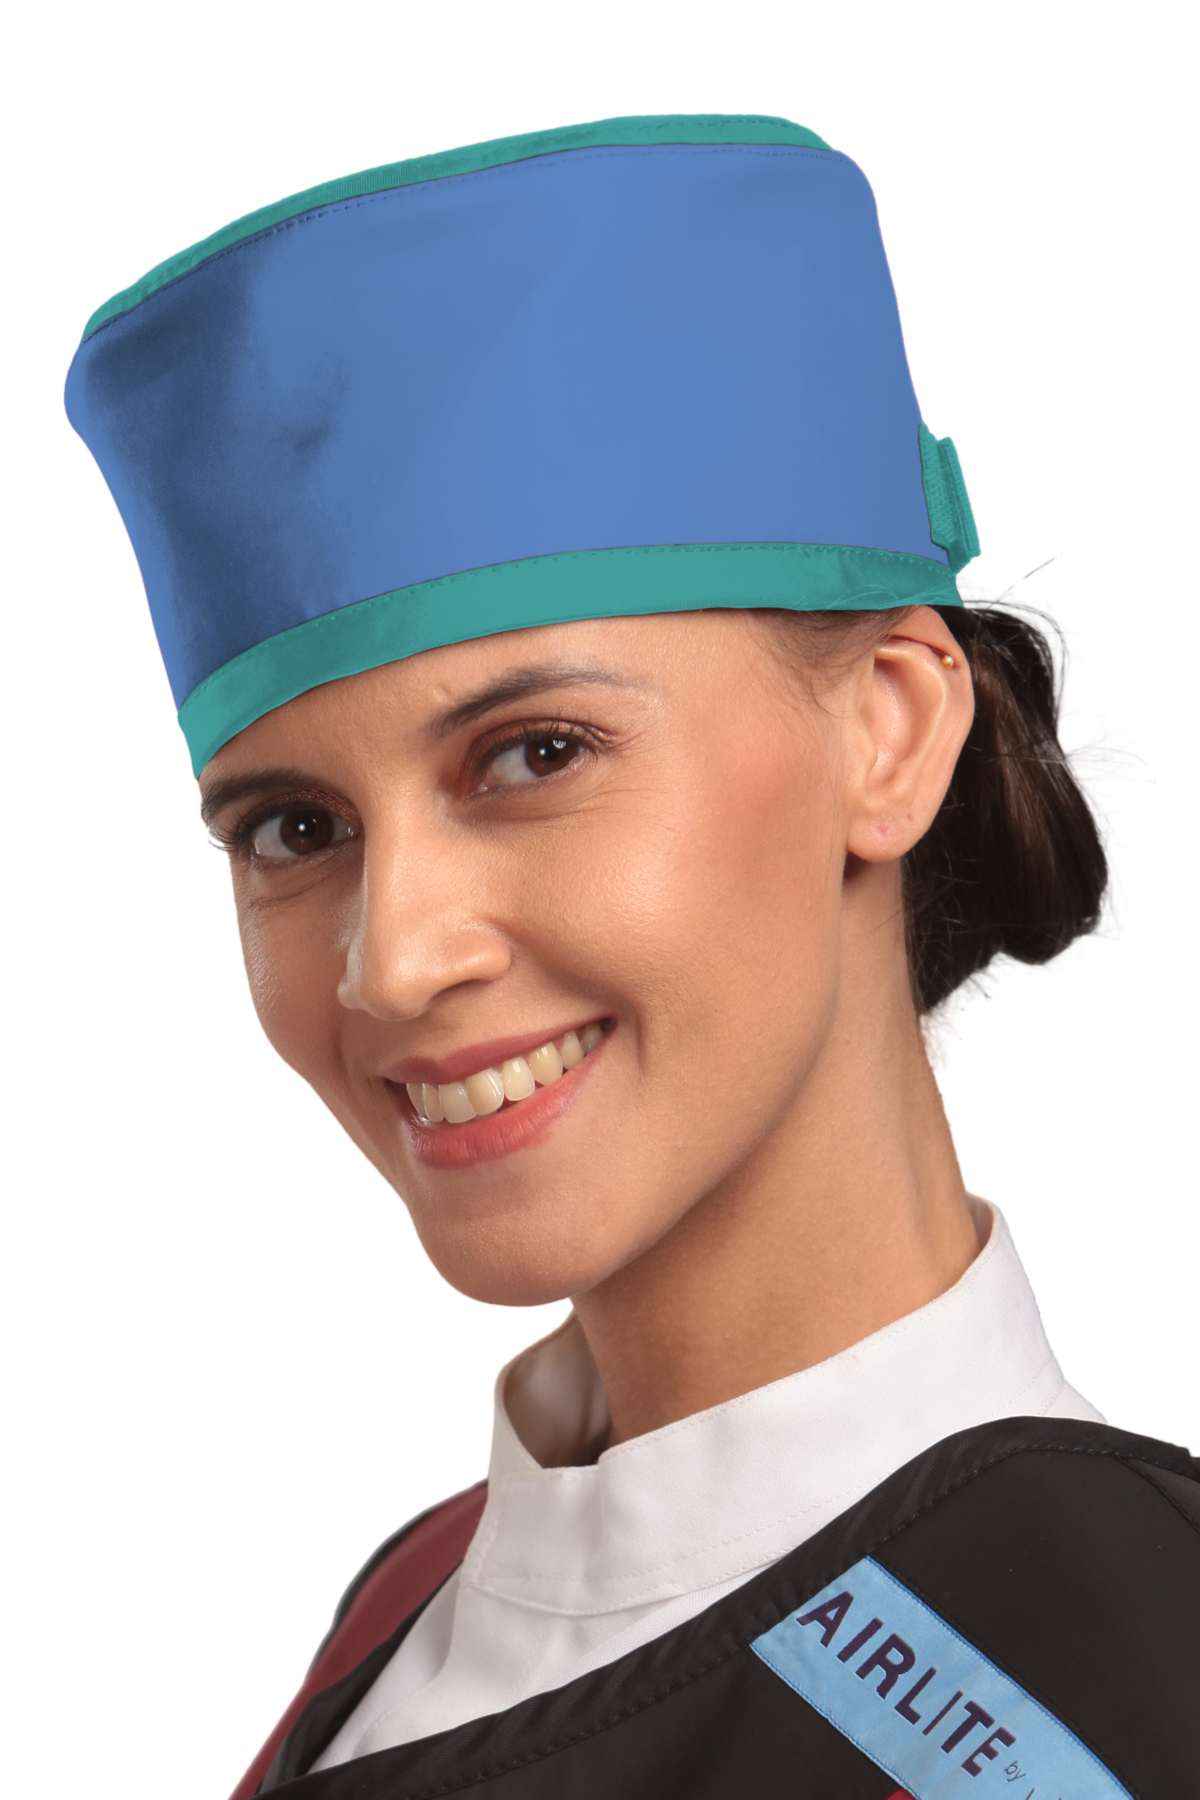 Up-close left-side frontal view of a female model wearing a radiation protection head shield. The head shield is Royal blue with Ocean green-colored lines around the lower and upper edges.